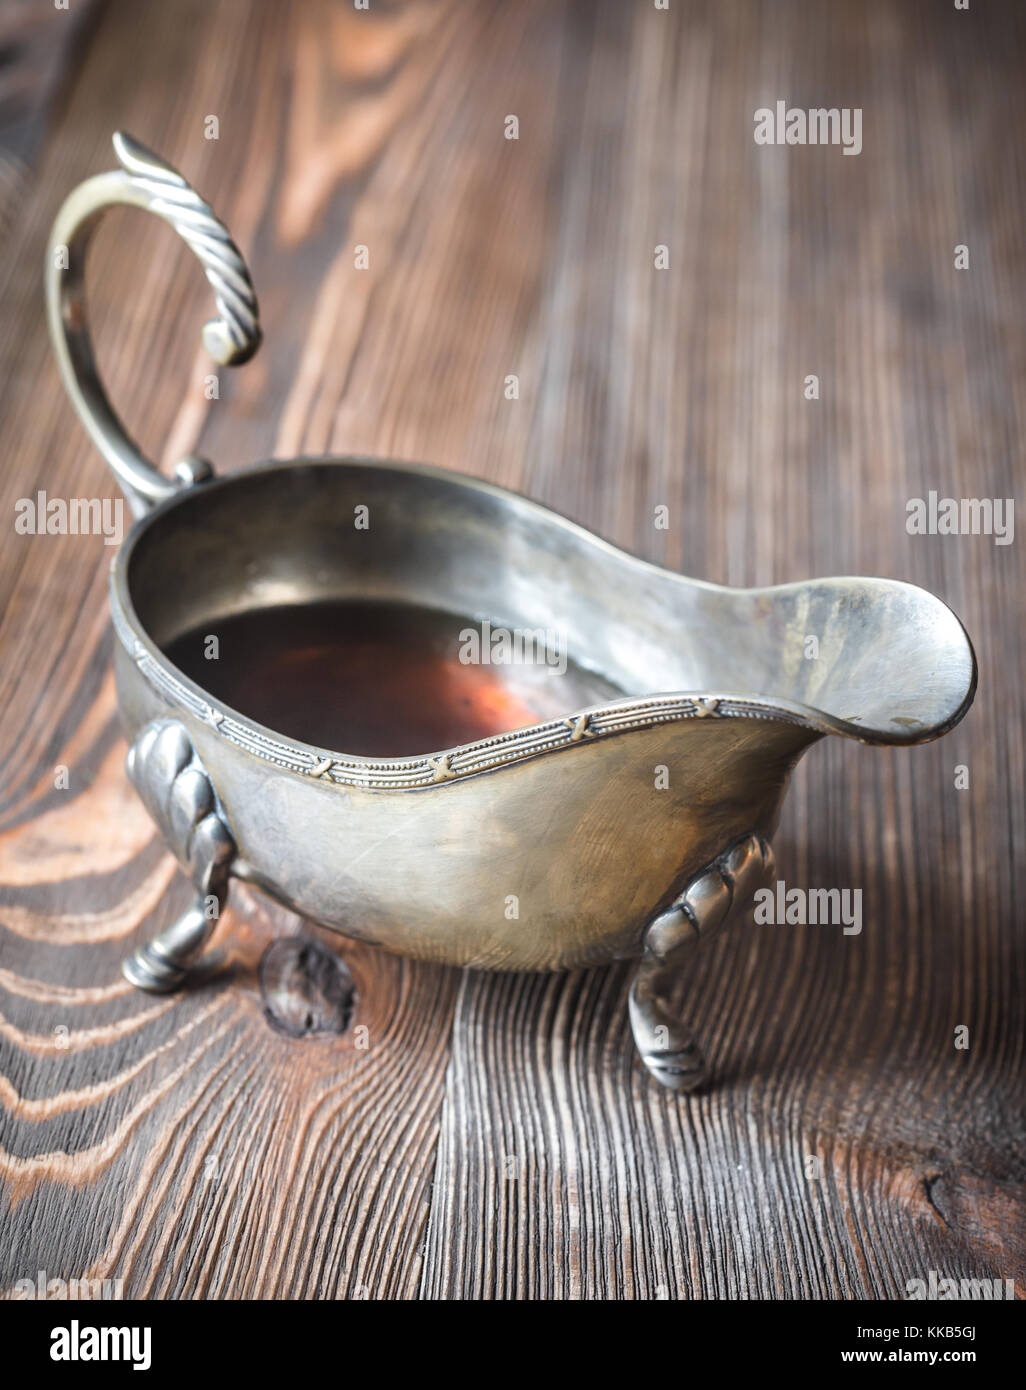 Maple syrup in vintage sauce boat Stock Photo